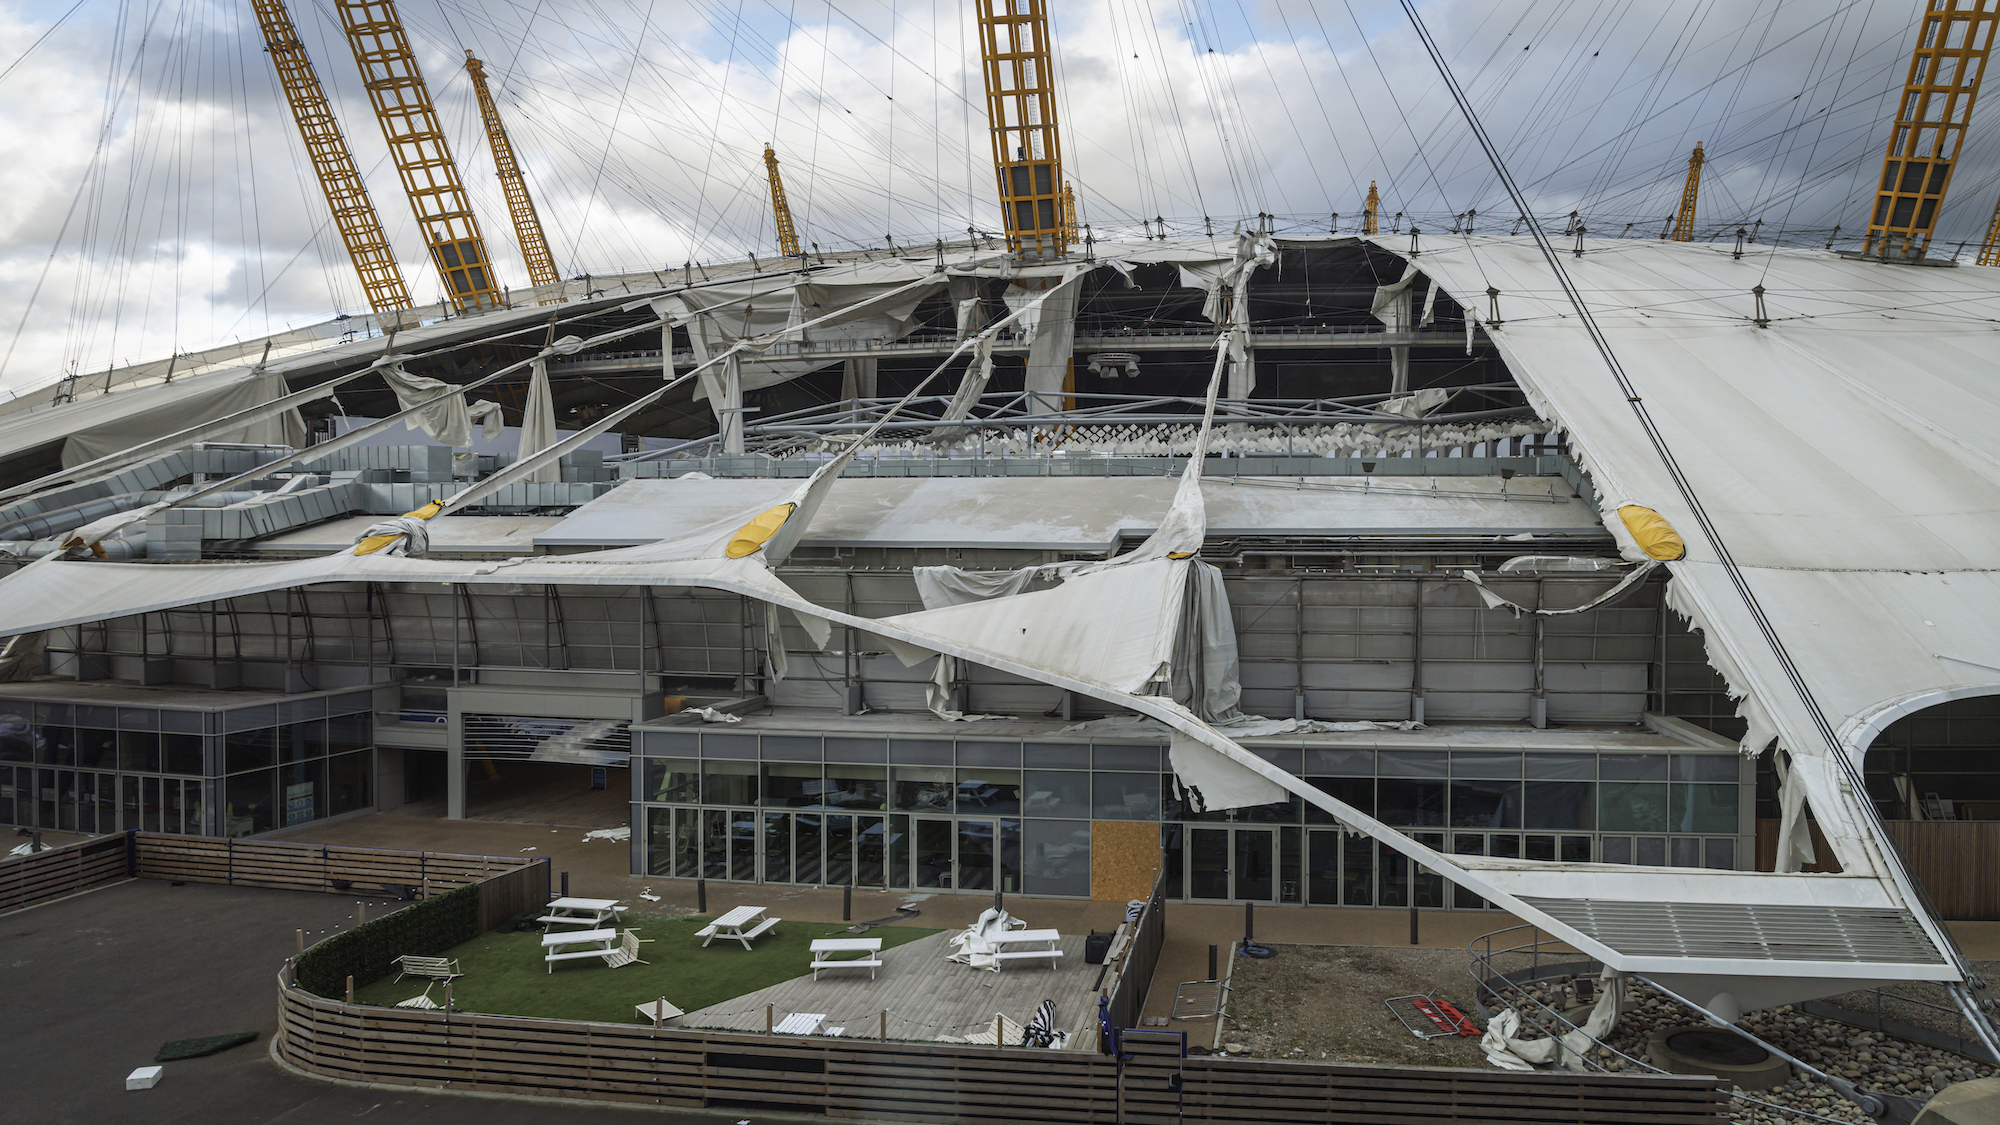 The roof of London's 02 Arena was left shredded by the storm.